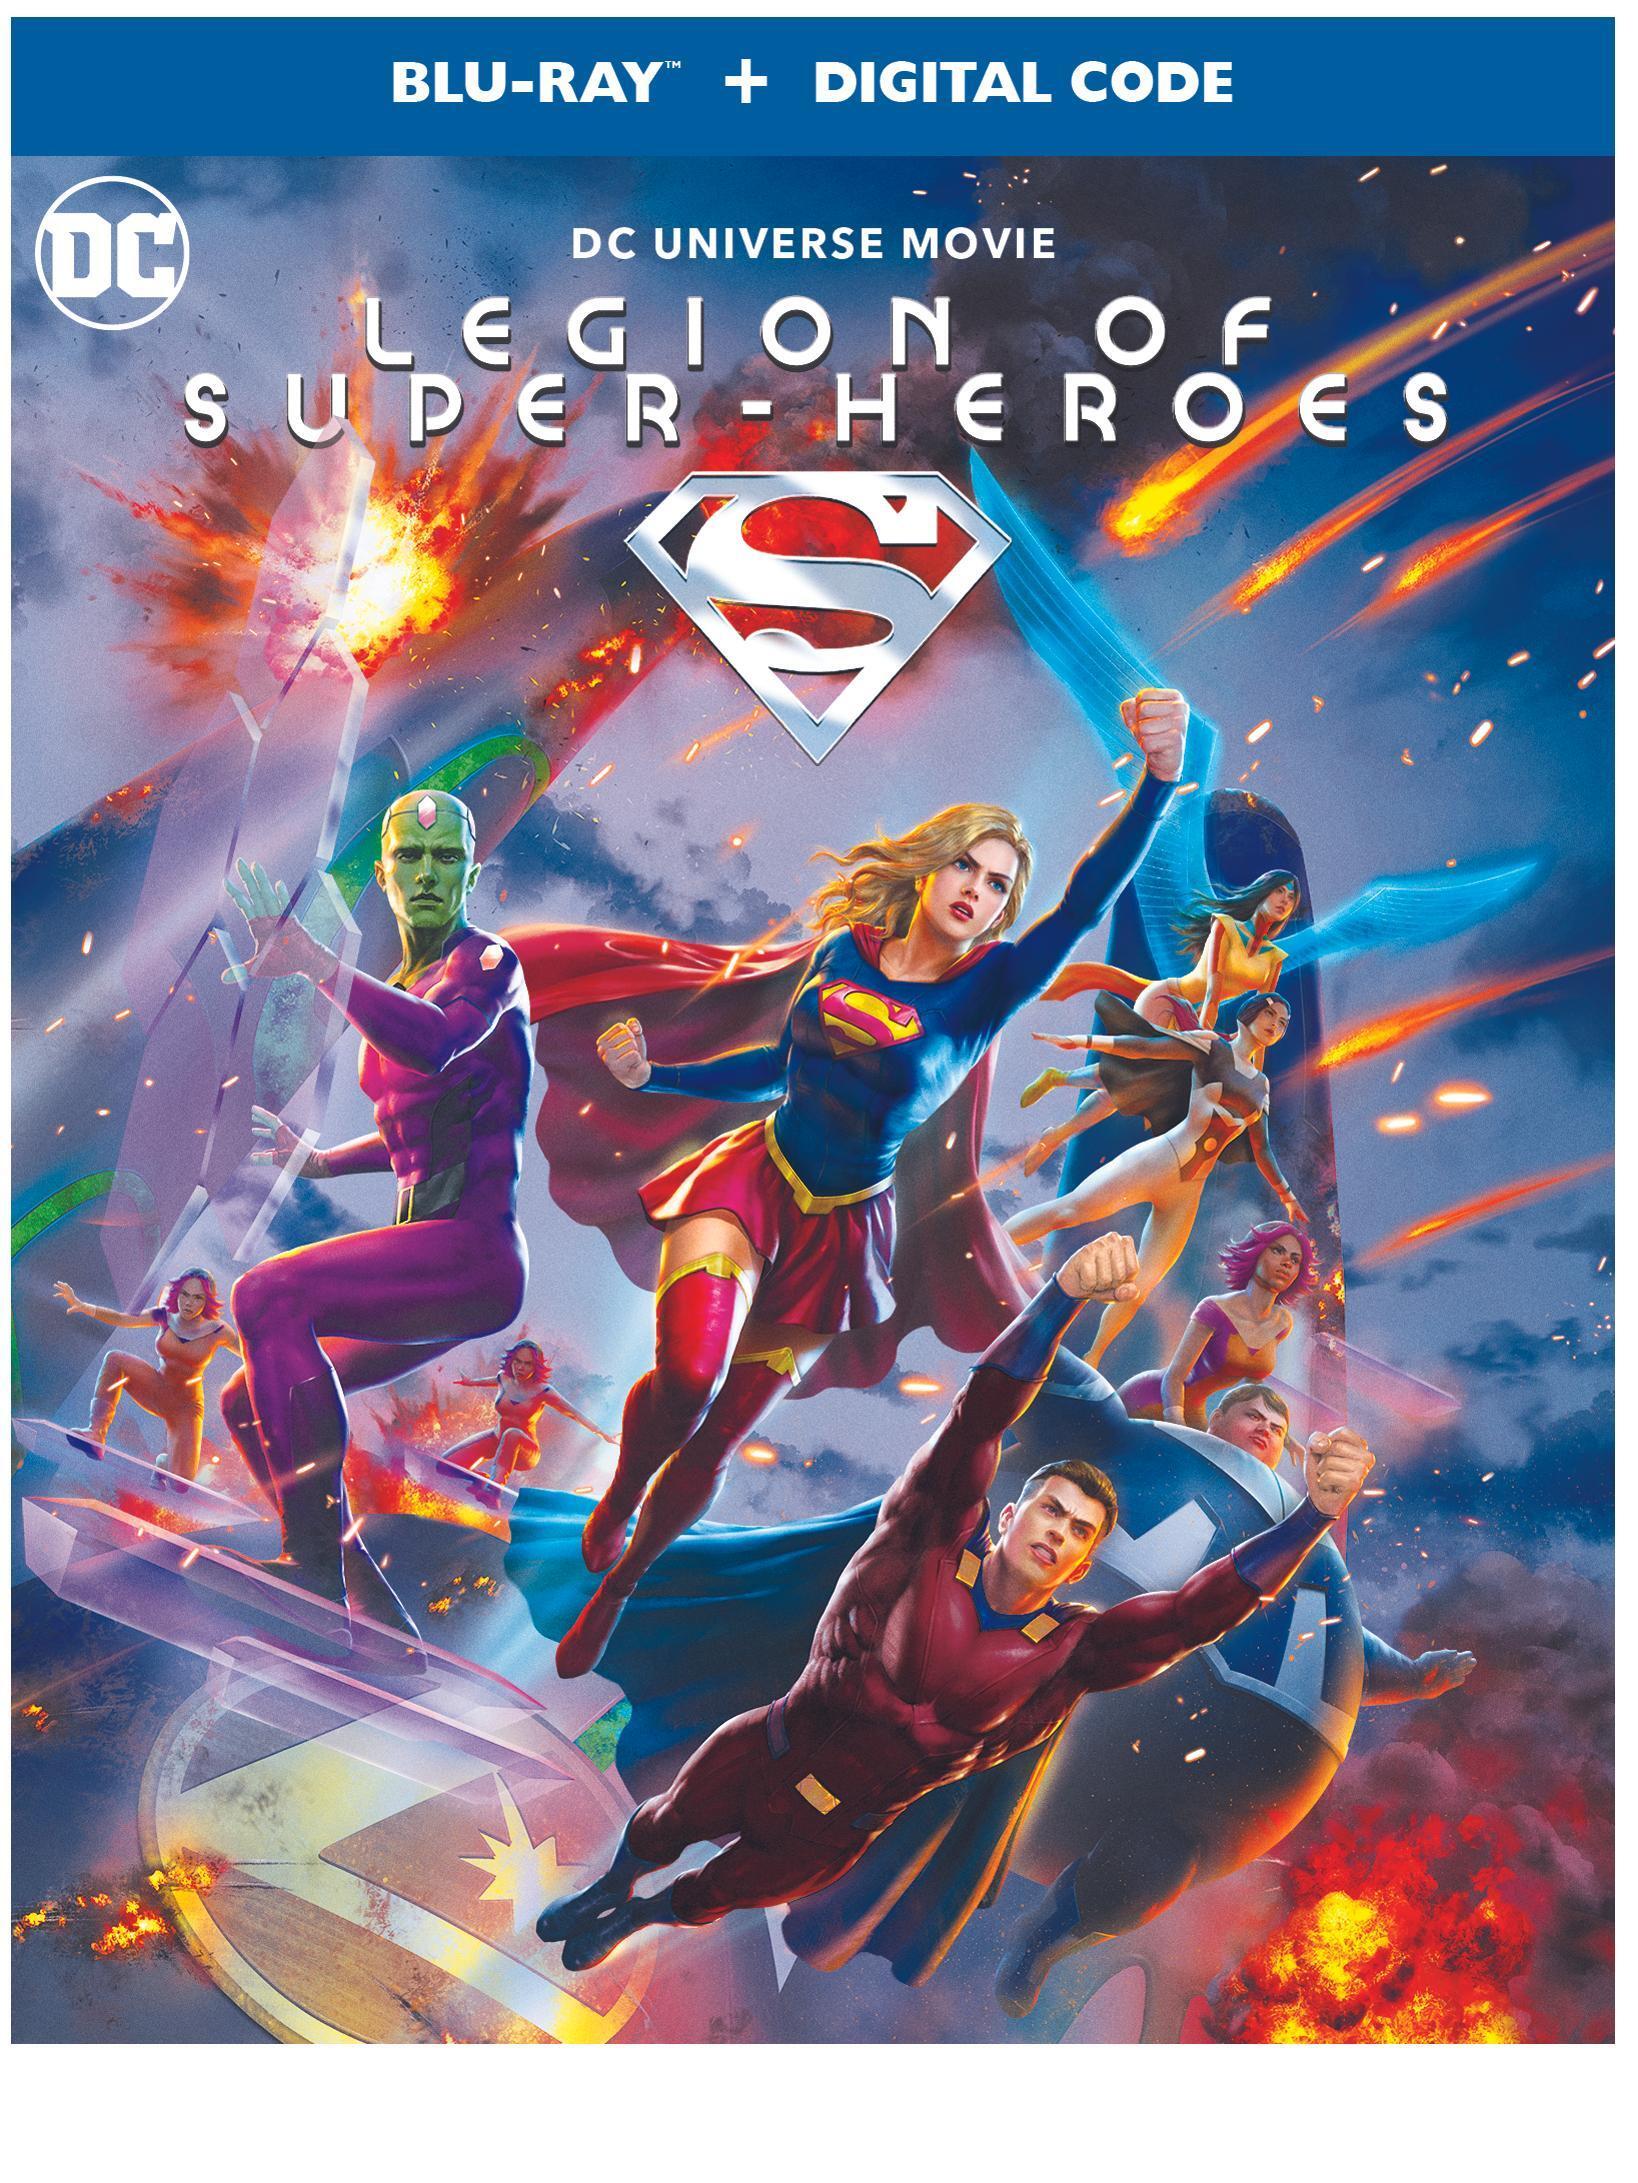 Legion Of Super-heroes - Blu-ray [ 2023 ]  - Animation Movies On Blu-ray - Movies On GRUV